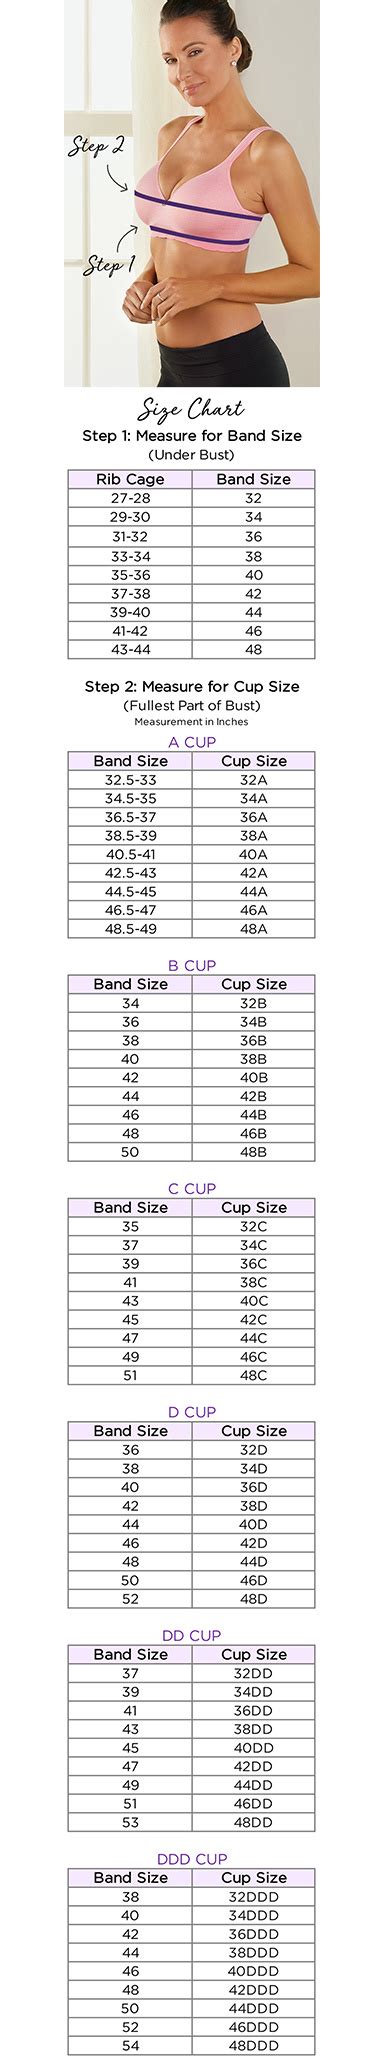 Bra Fit Guide And Bra Size Chart — Measure Your Bra Size —